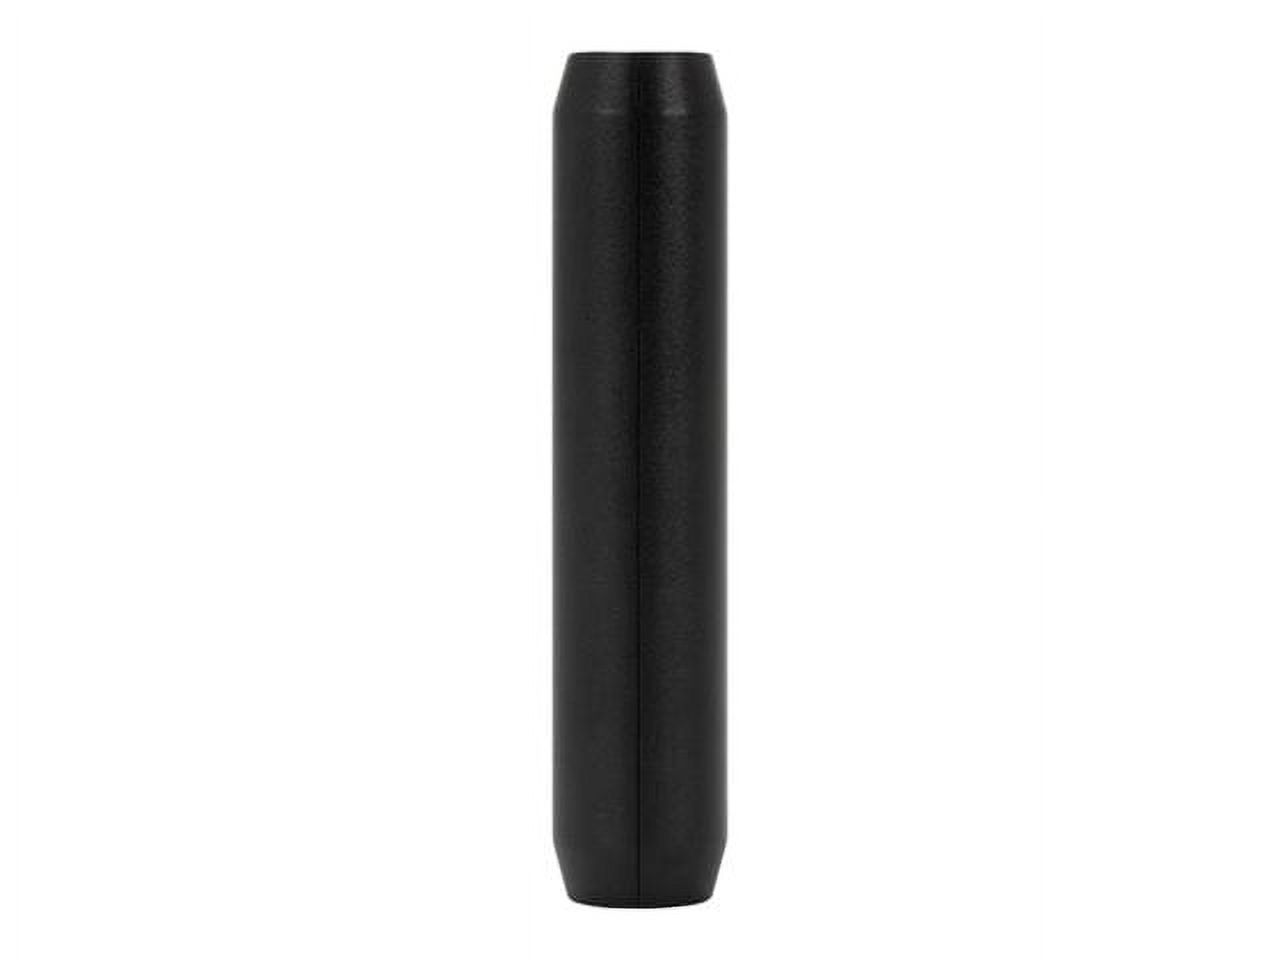 Griffin Reserve Power Bank, 6000mAh, Black - image 4 of 4